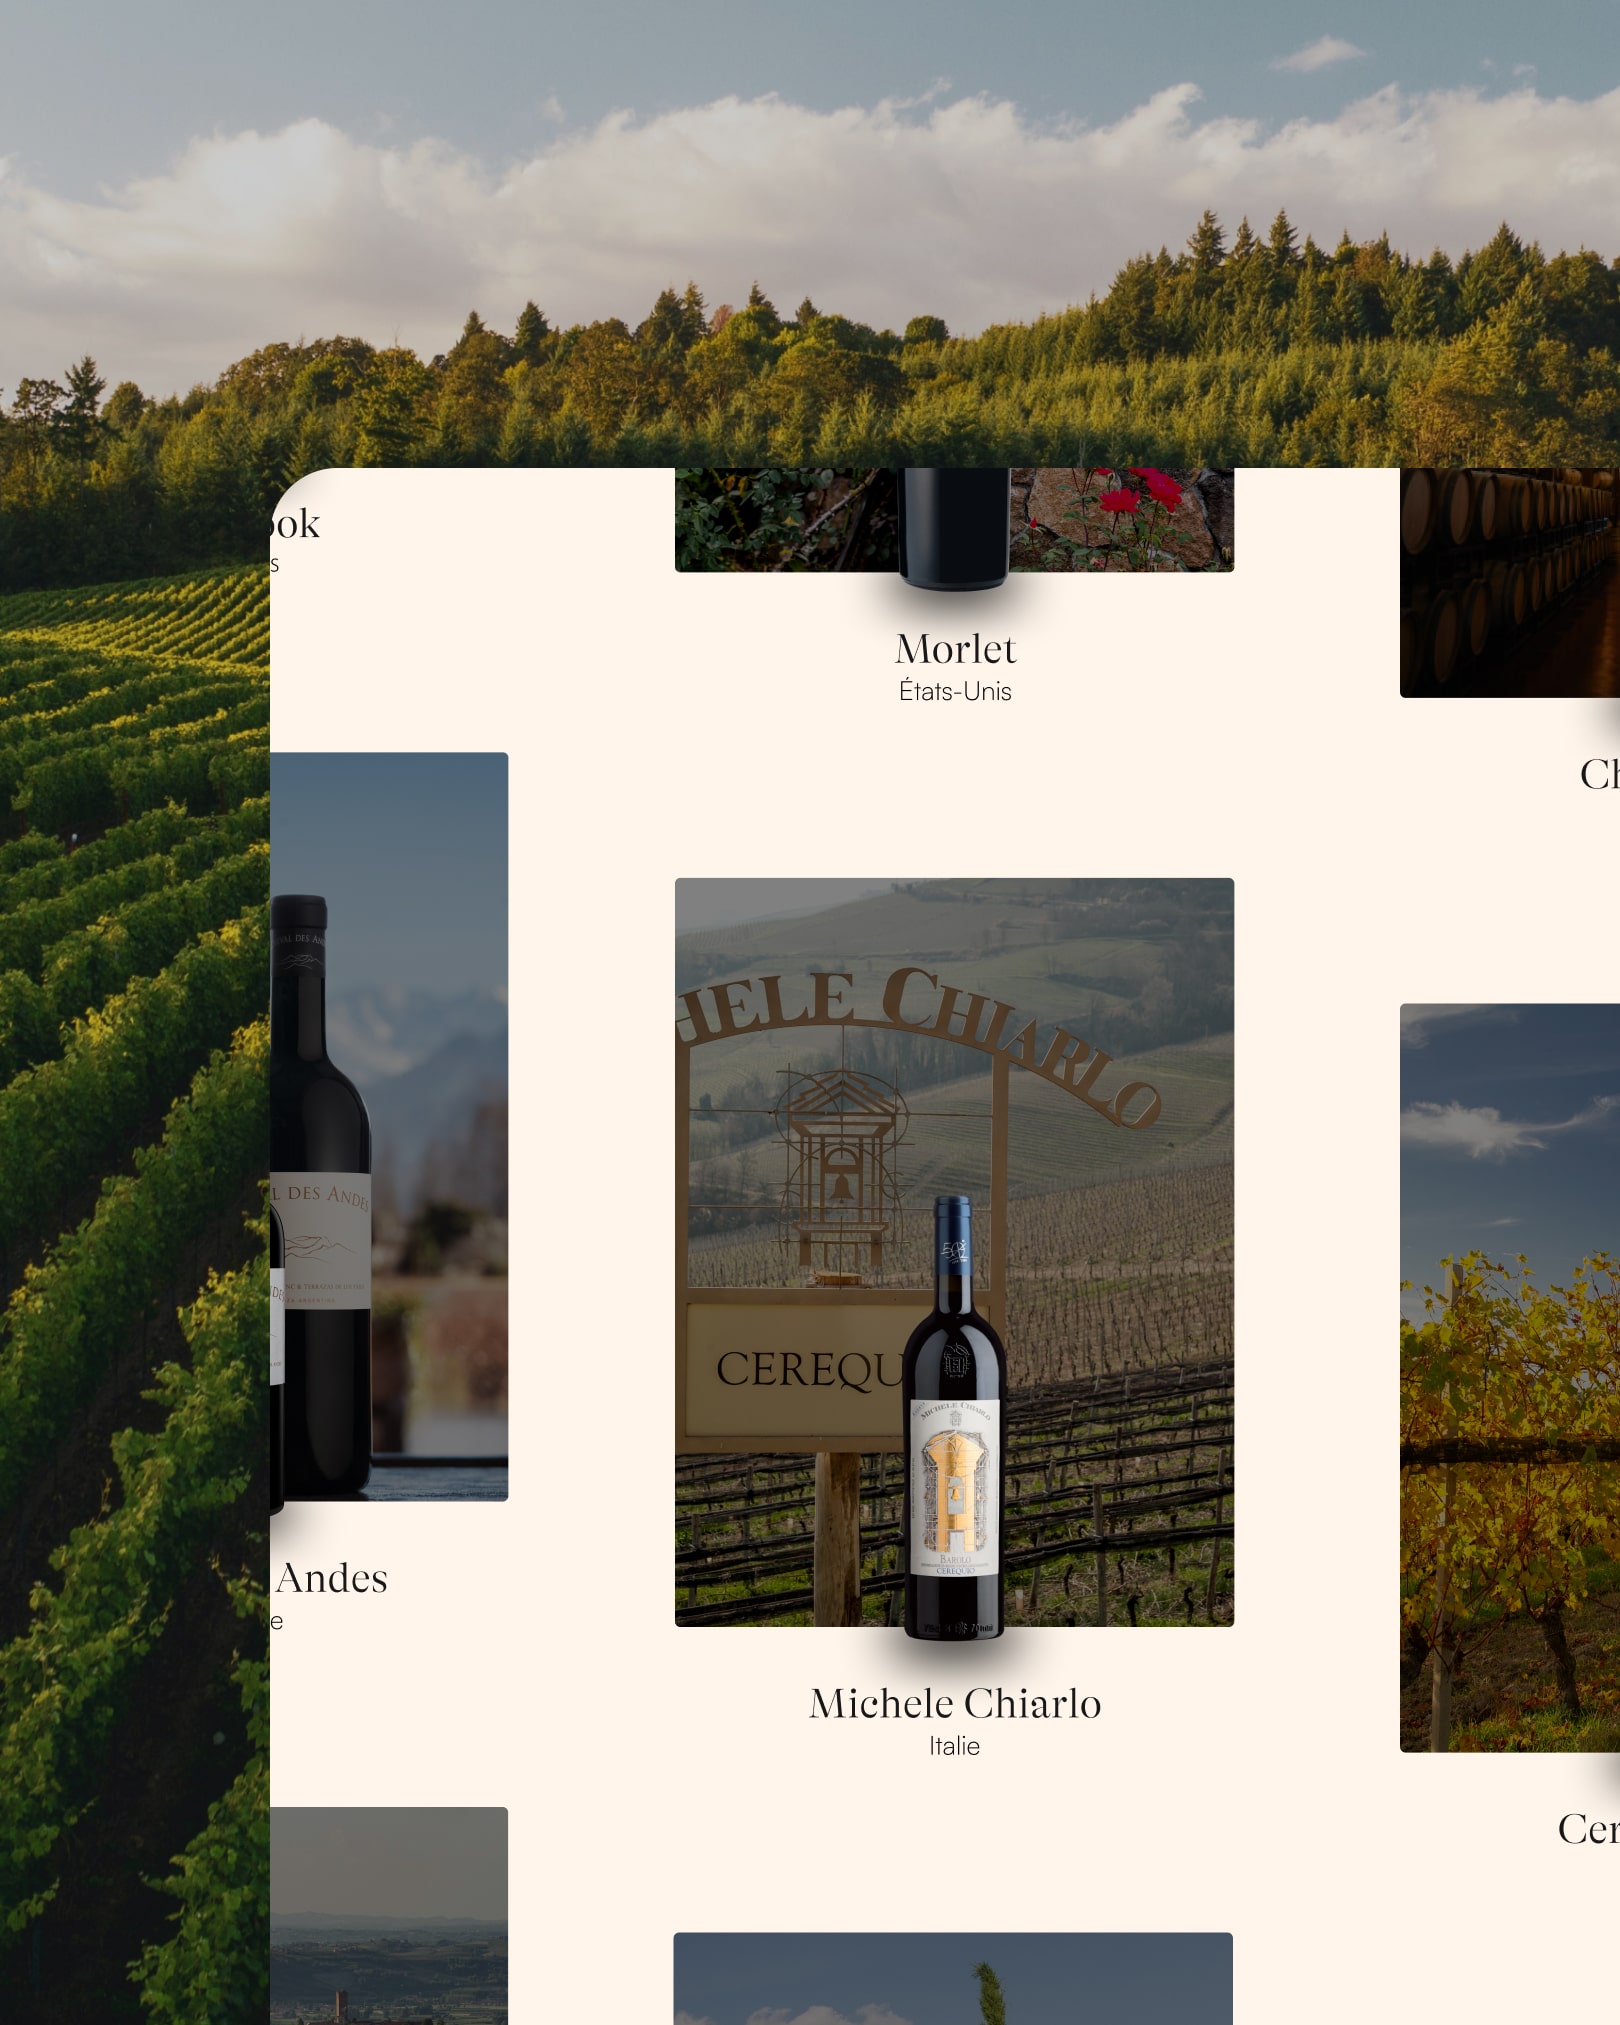 Showcasing Constance's partners through vineyards and bottle visuals